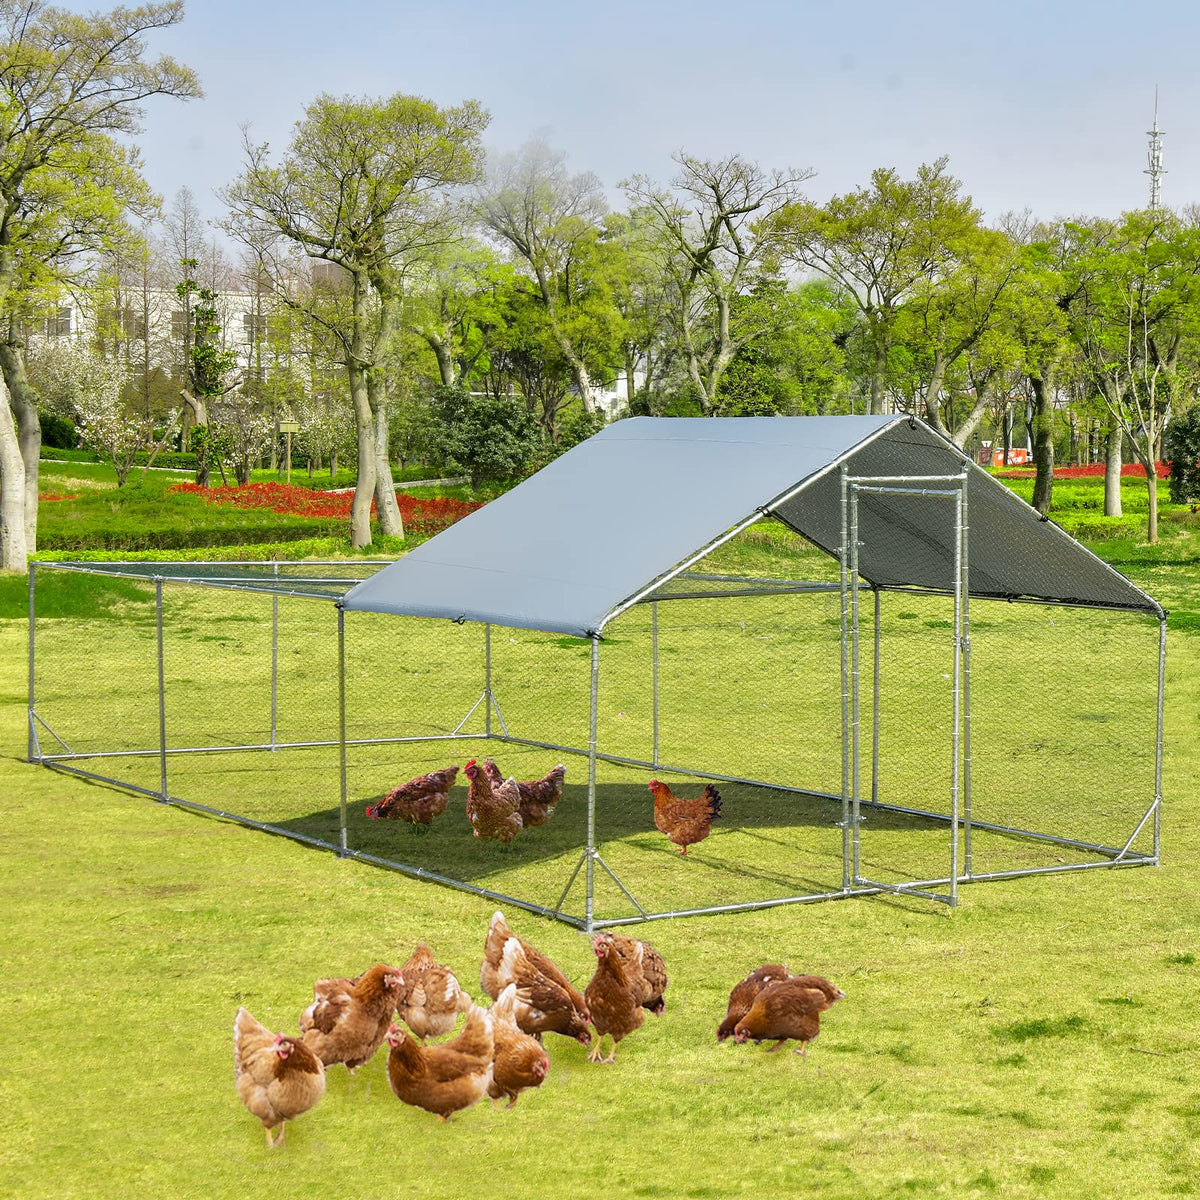 Large Metal Chicken Coop, Walk-in Poultry Cage Hen Rabbit Run House with Waterproof & Sun-Proof Cover